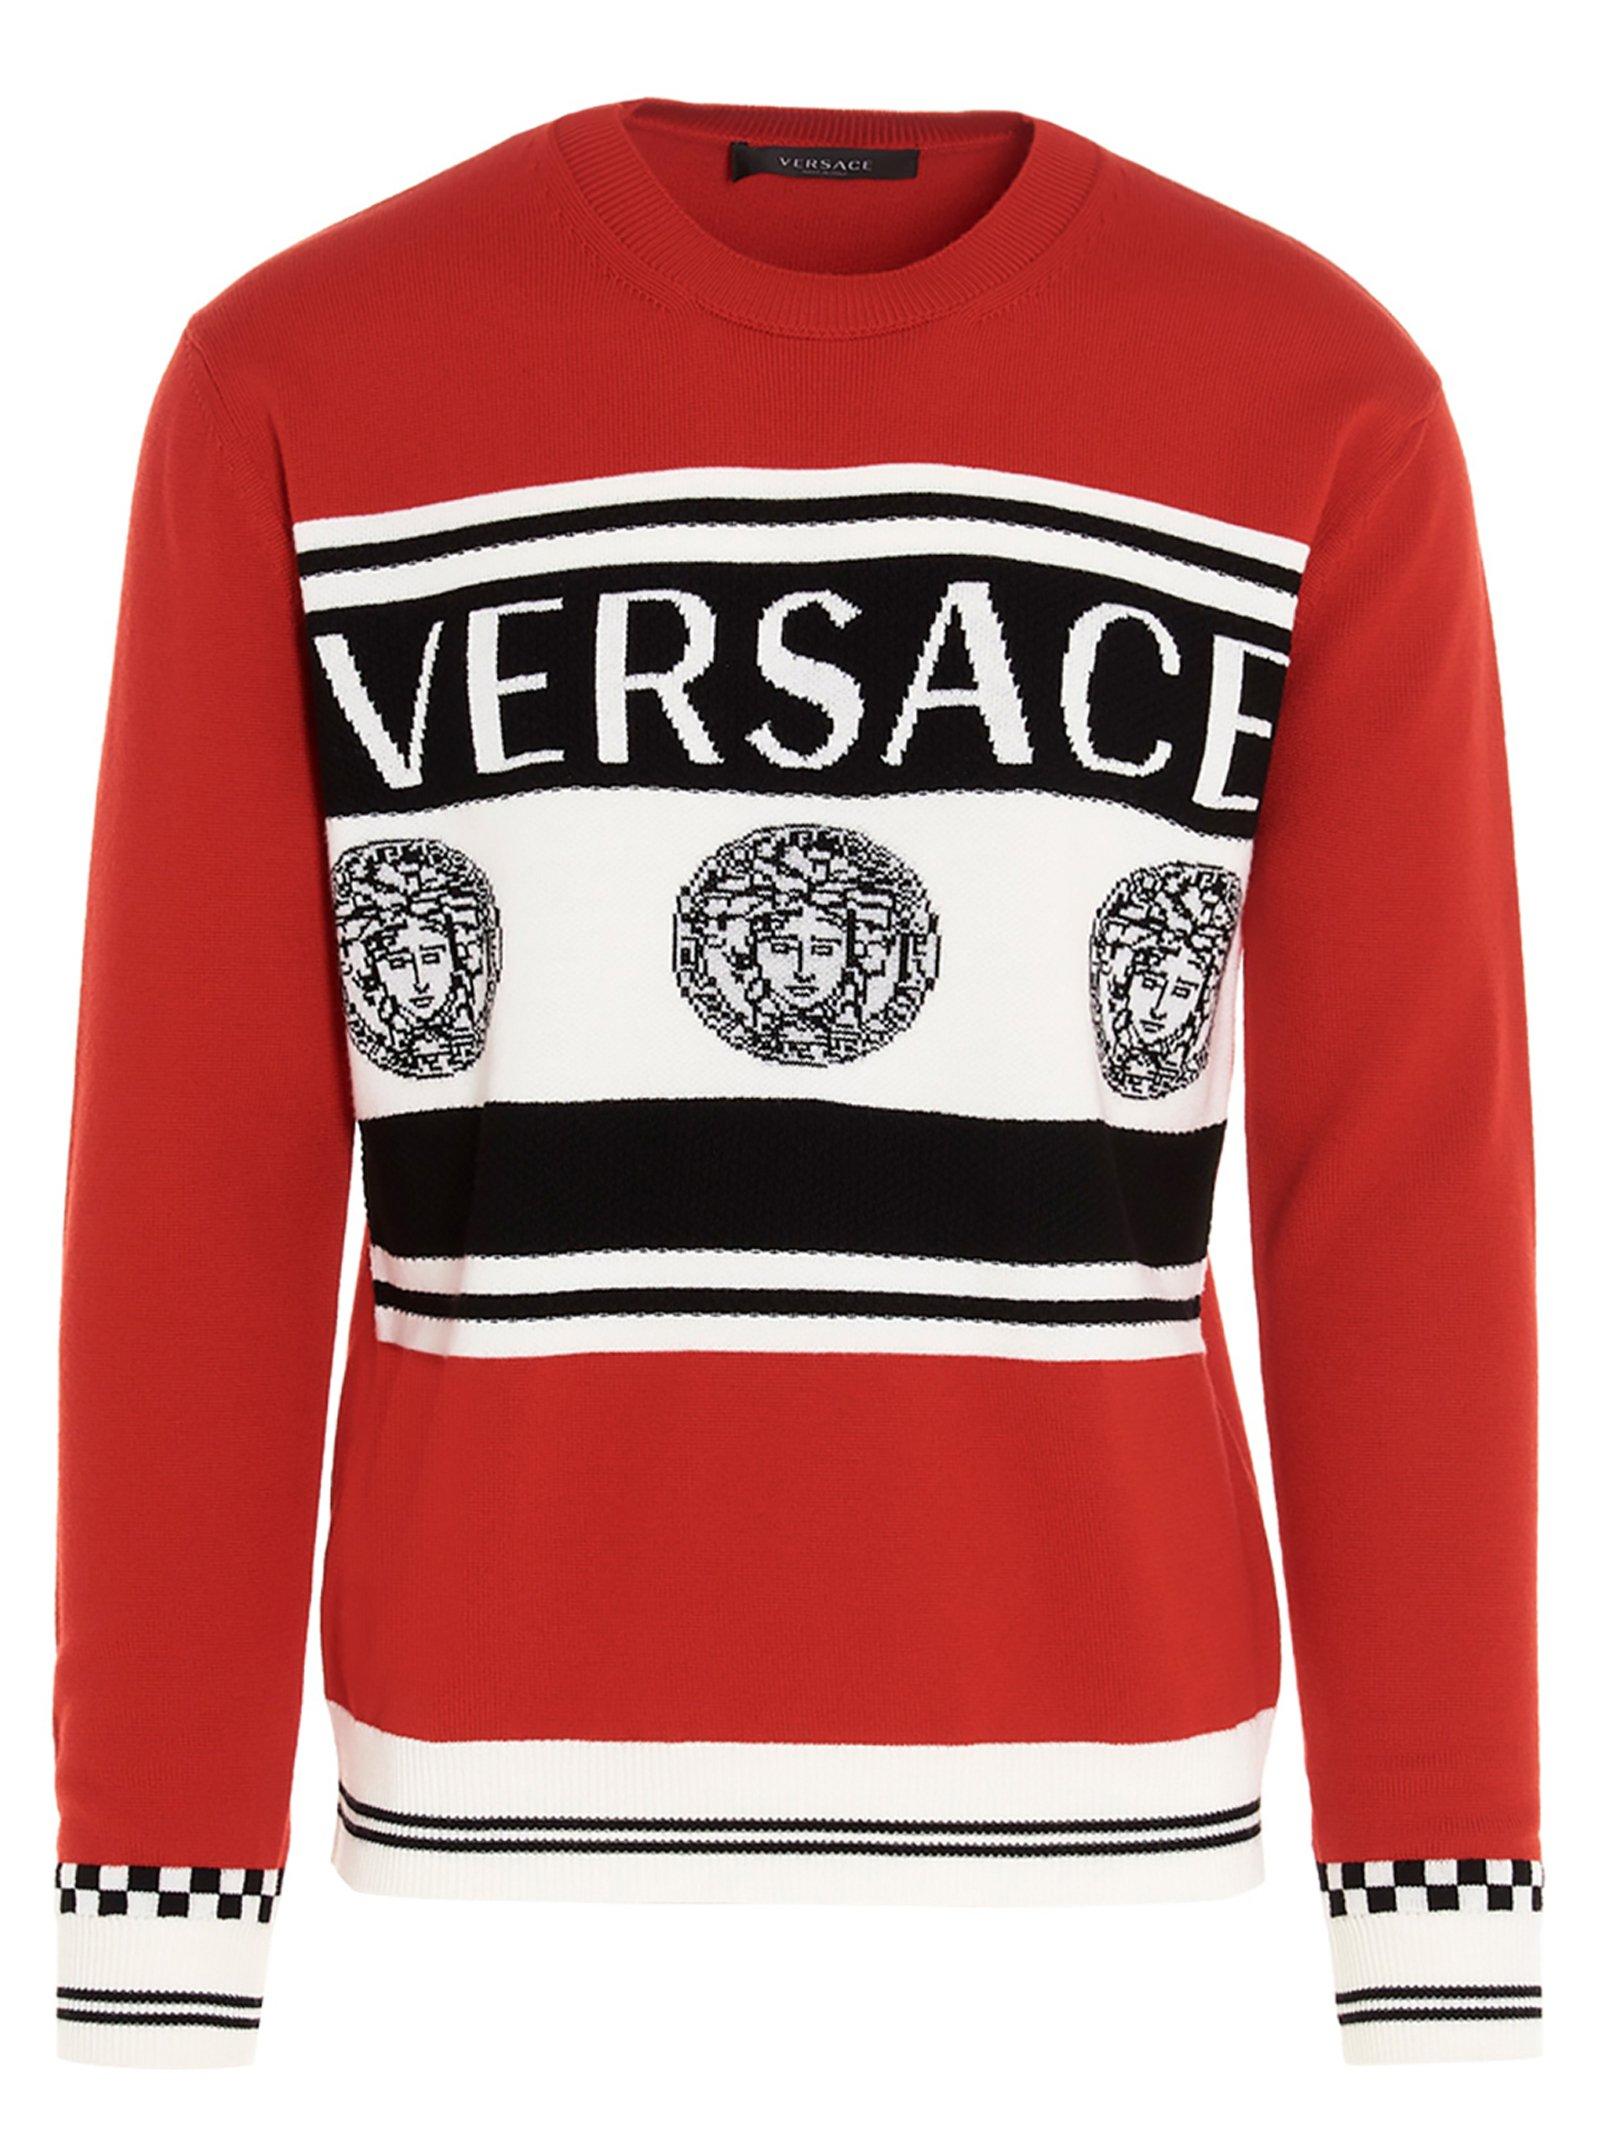 Versace Wool Medusa Logo Print Knit Sweater in Red for Men - Lyst